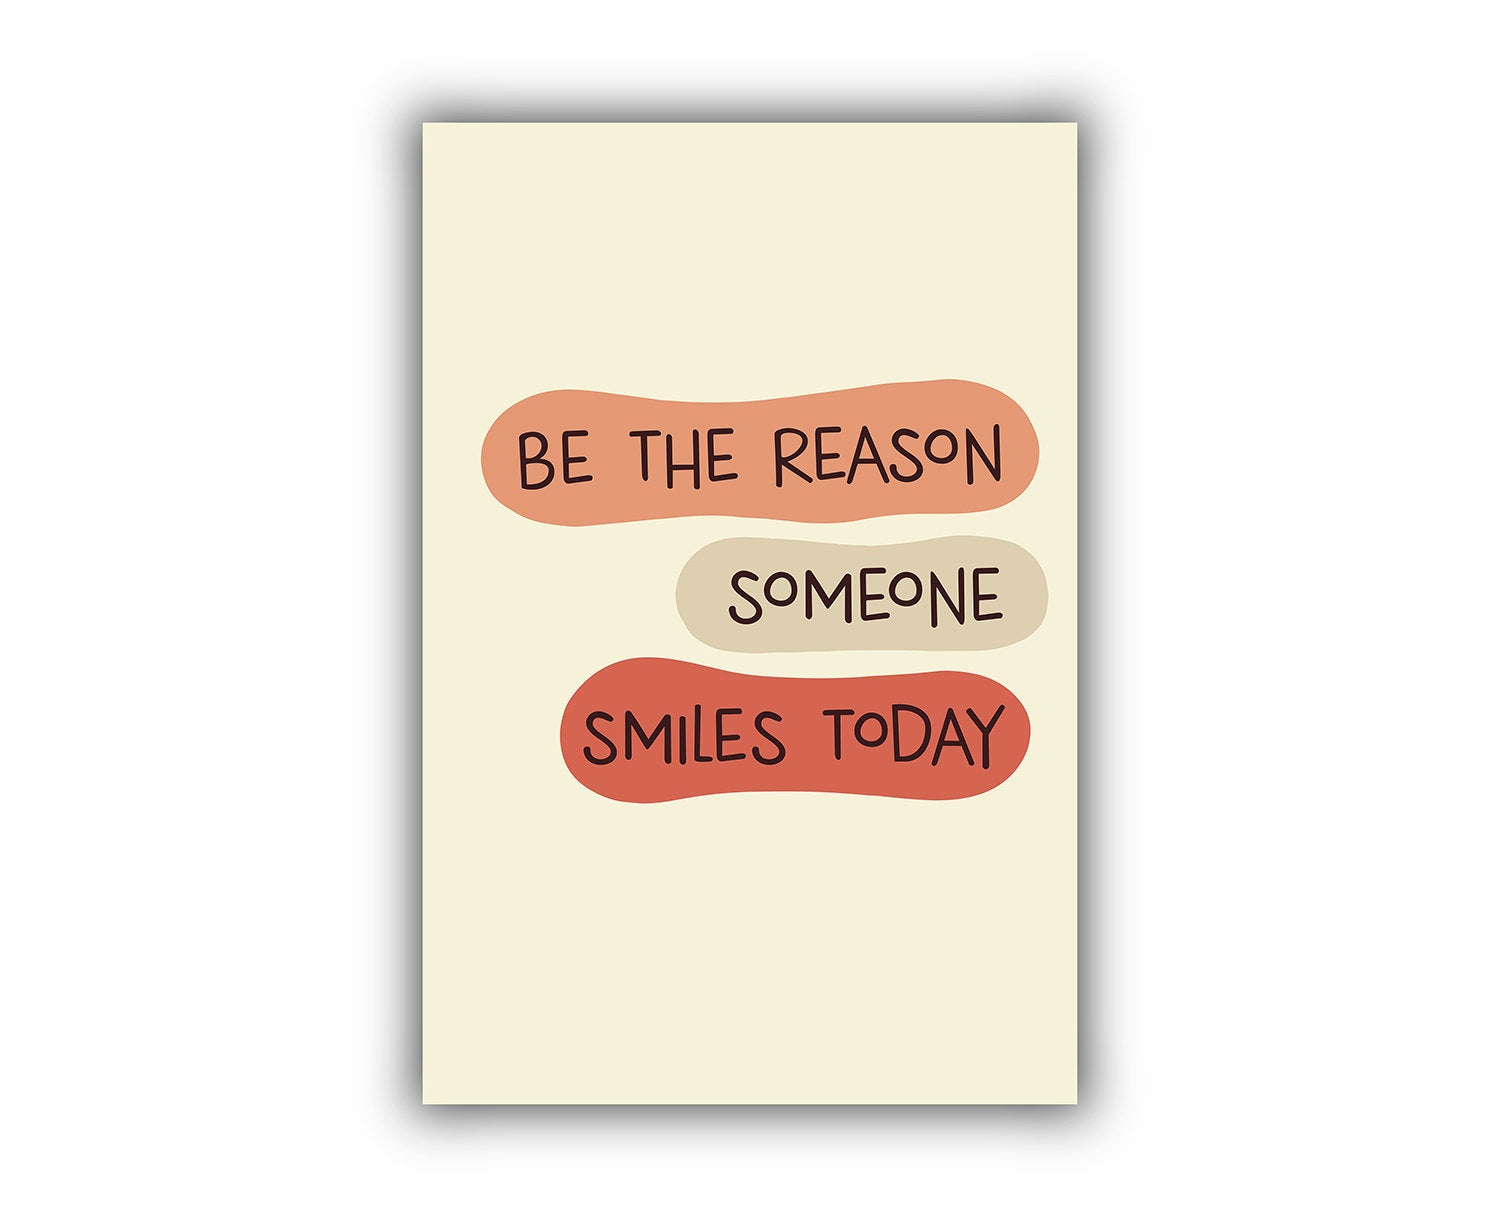 Be the reason someone smiles today, Quote, Inspirational Poster, Home art prints, Home decor, Dorm rooms wall decor, Office wall art, Poster